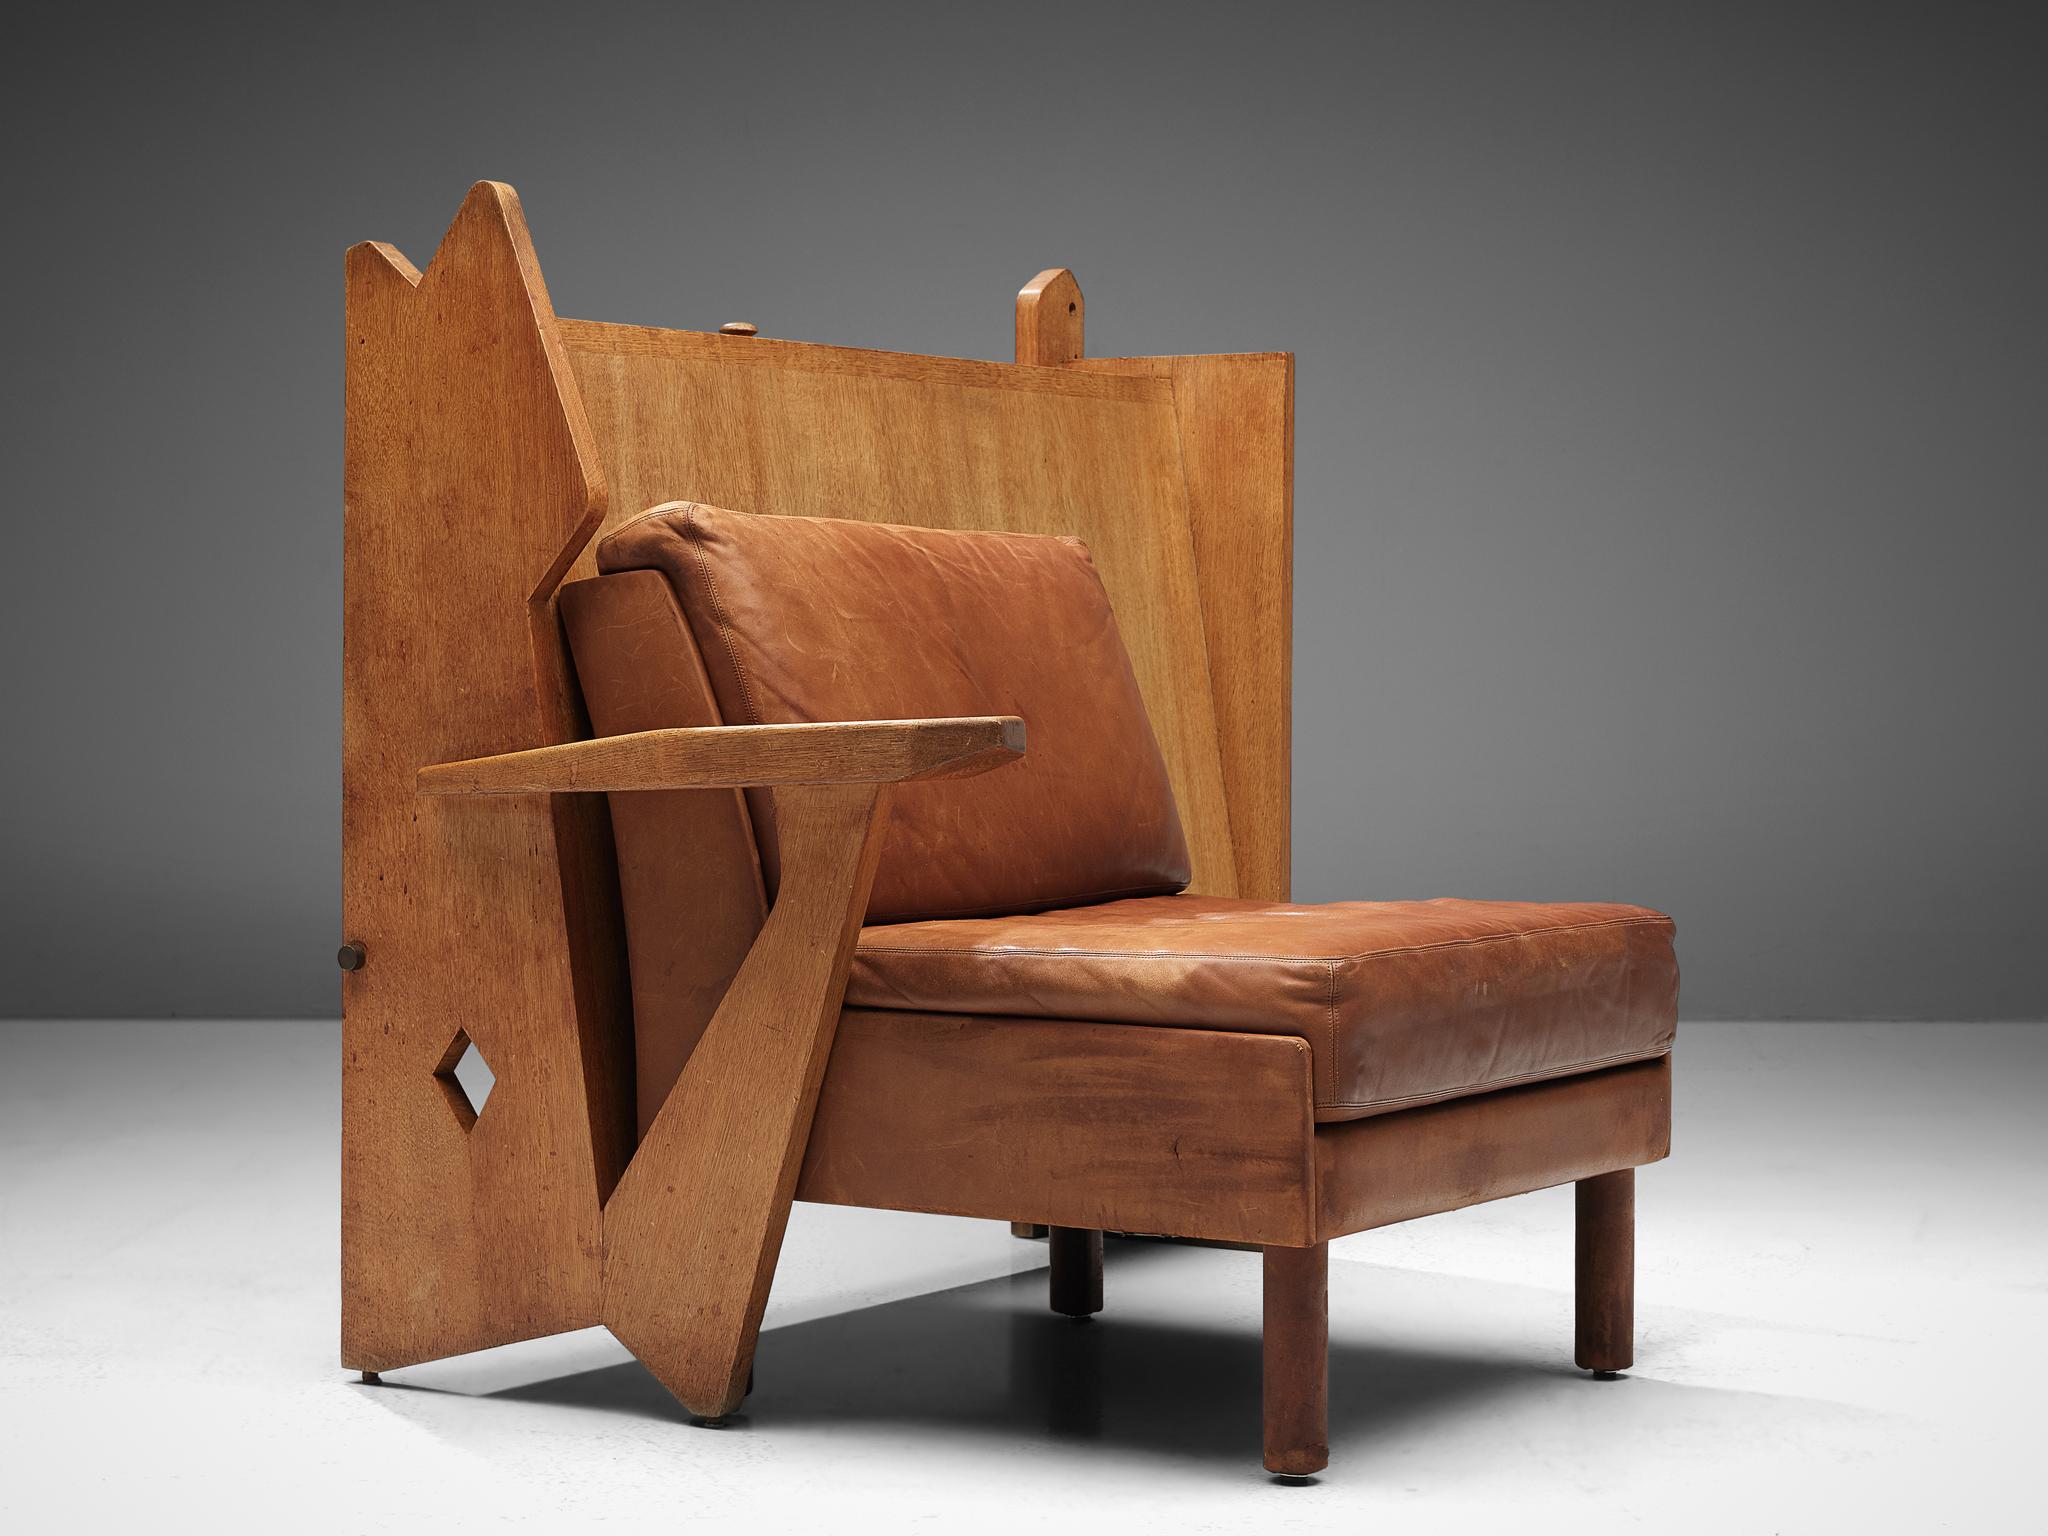 Guillerme et Chambron for Votre Maison, lounge chair and cabinet, oak, leather, France, 1960s

This is a remarkable piece of furniture by Guillerme et Chambron. The whole construction is based on a seating area and a unique, custom-made cabinet. The